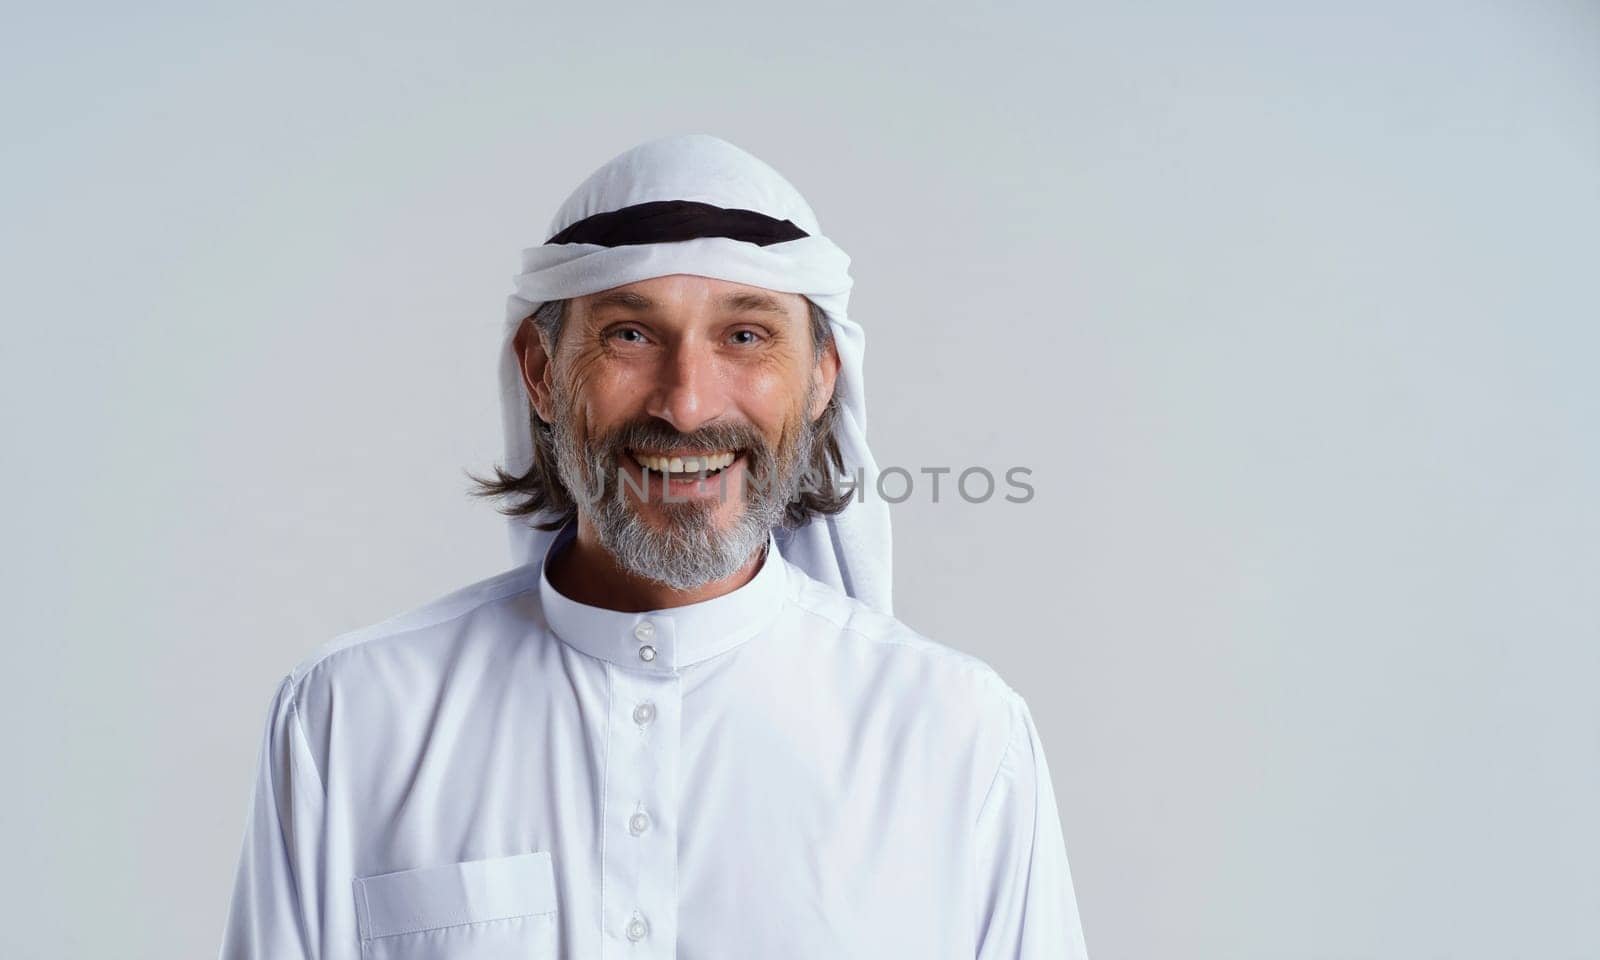 Smiling, happy Arab man in dishdasha, traditional clothing worn by Muslim men in the Middle East, isolated on white background with copy space. Man in headwear and has beard. mid length portrait. High quality photo